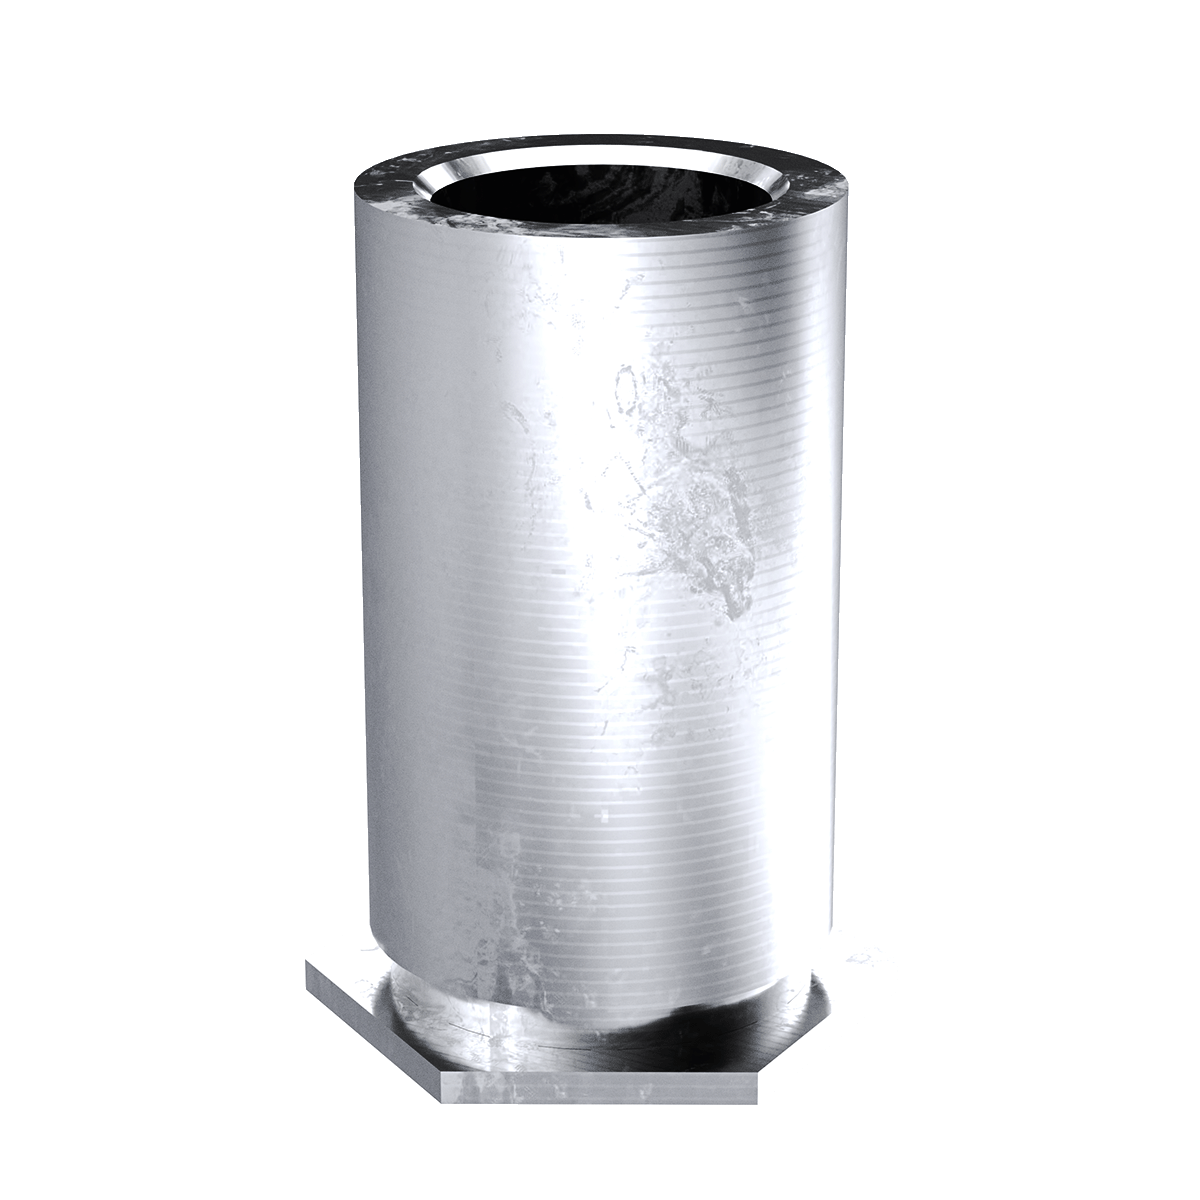 Self-Clinching Standoff, Through Unthreaded, 300 Series Stainless Steel, Passivated, 0.116 x 0.312, 100 Pack